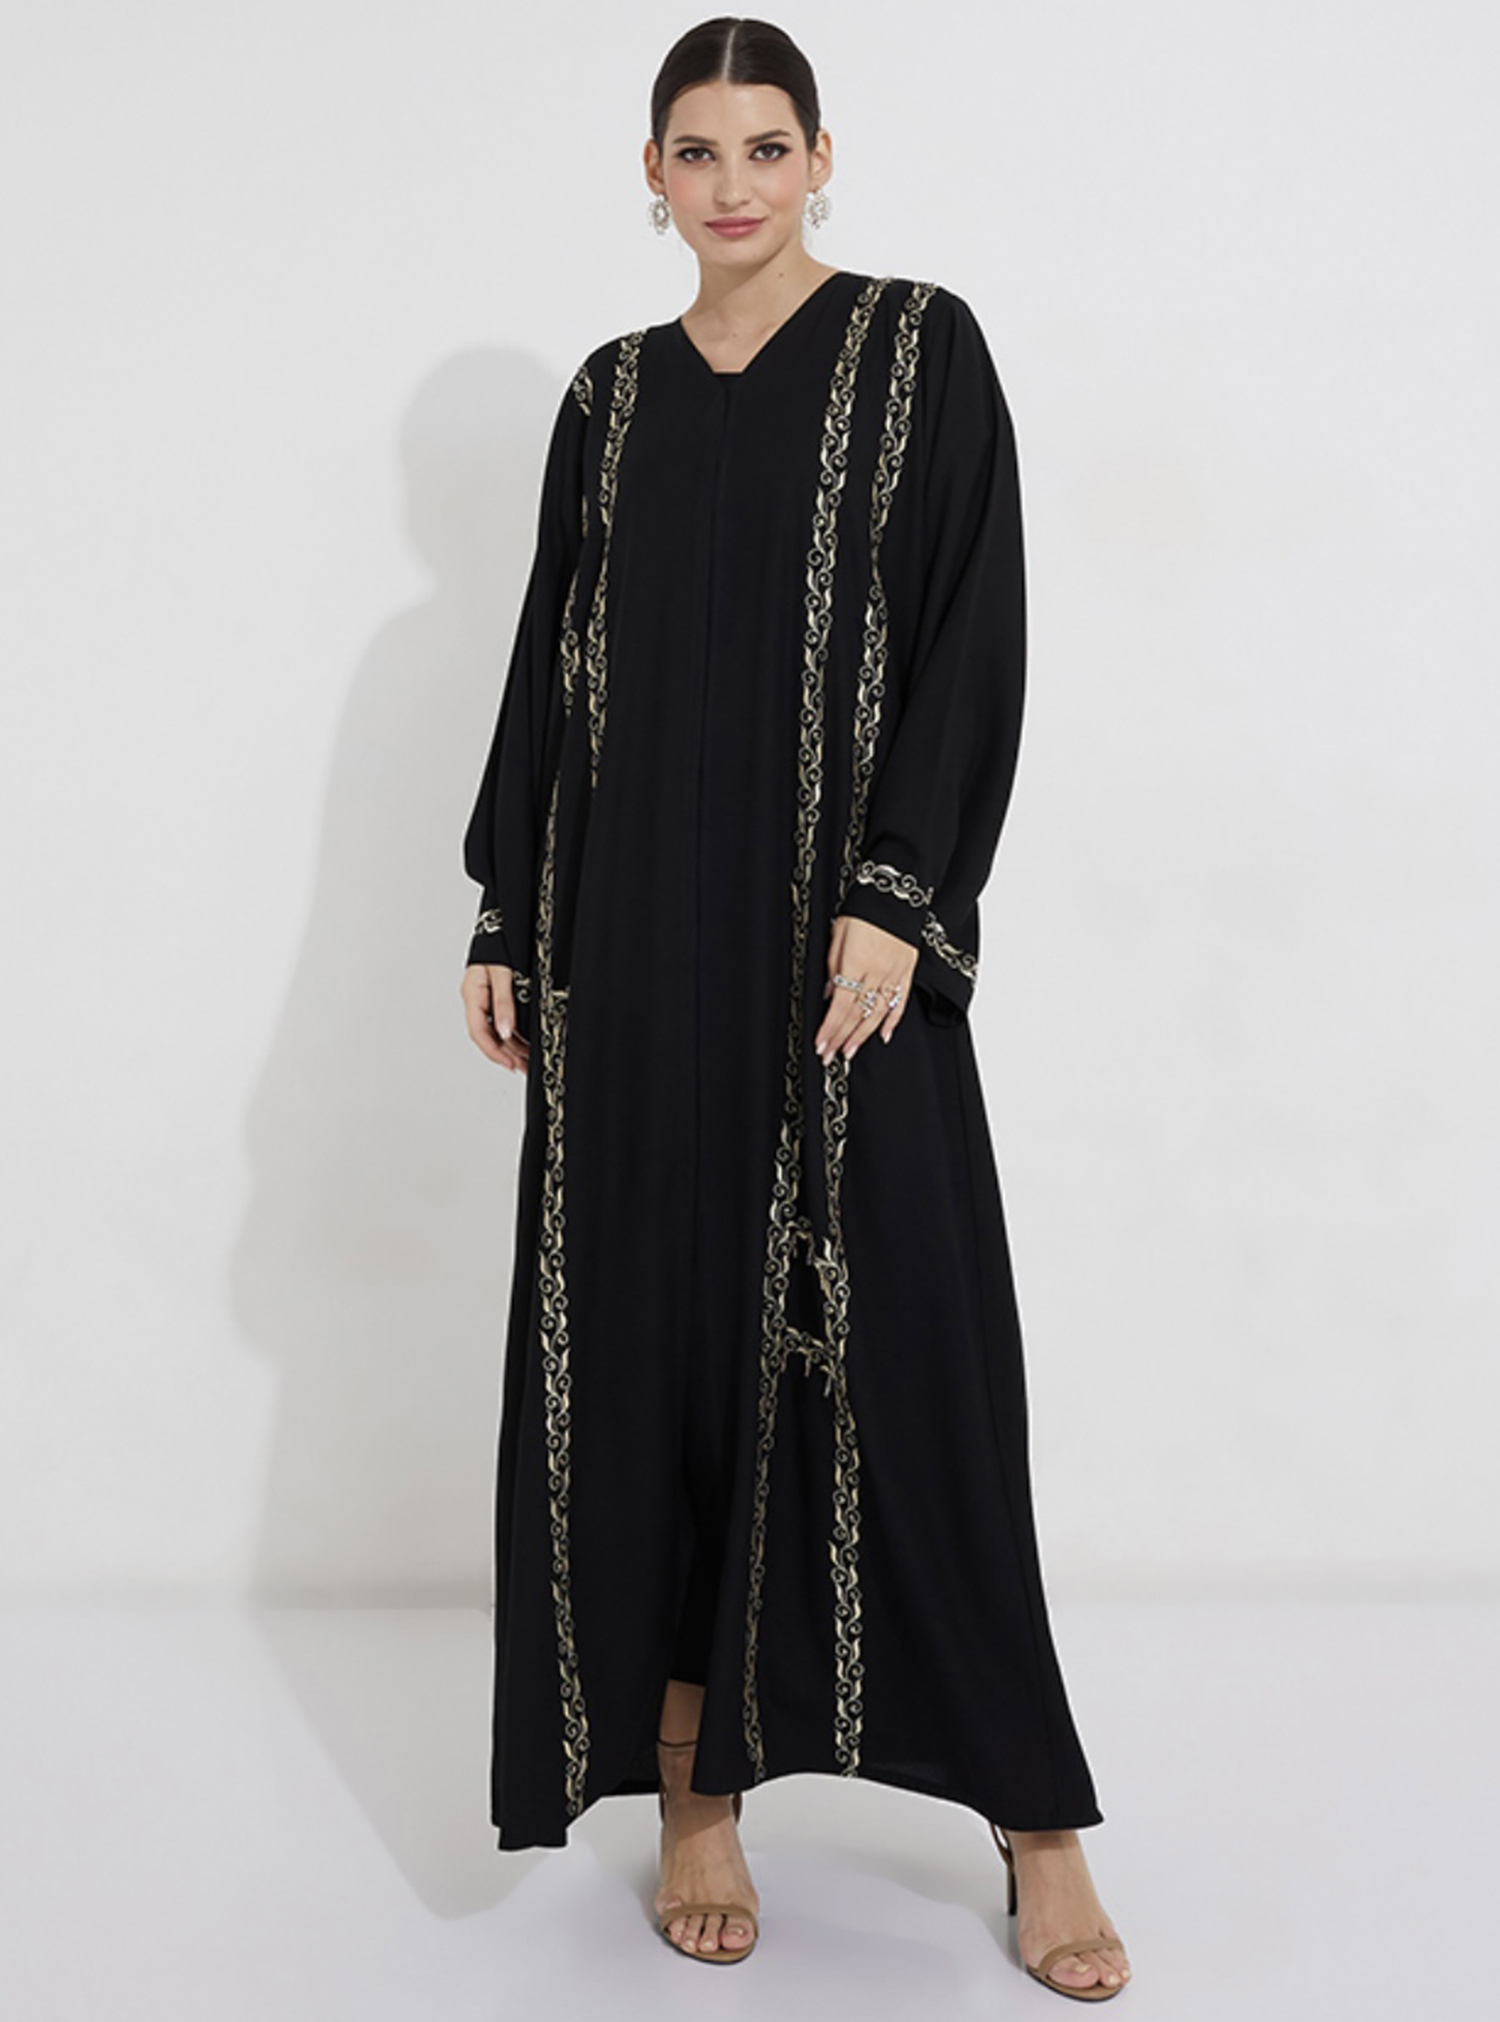 Gold Beads Abaya with gold sitching design and gold stones Abayas from ...